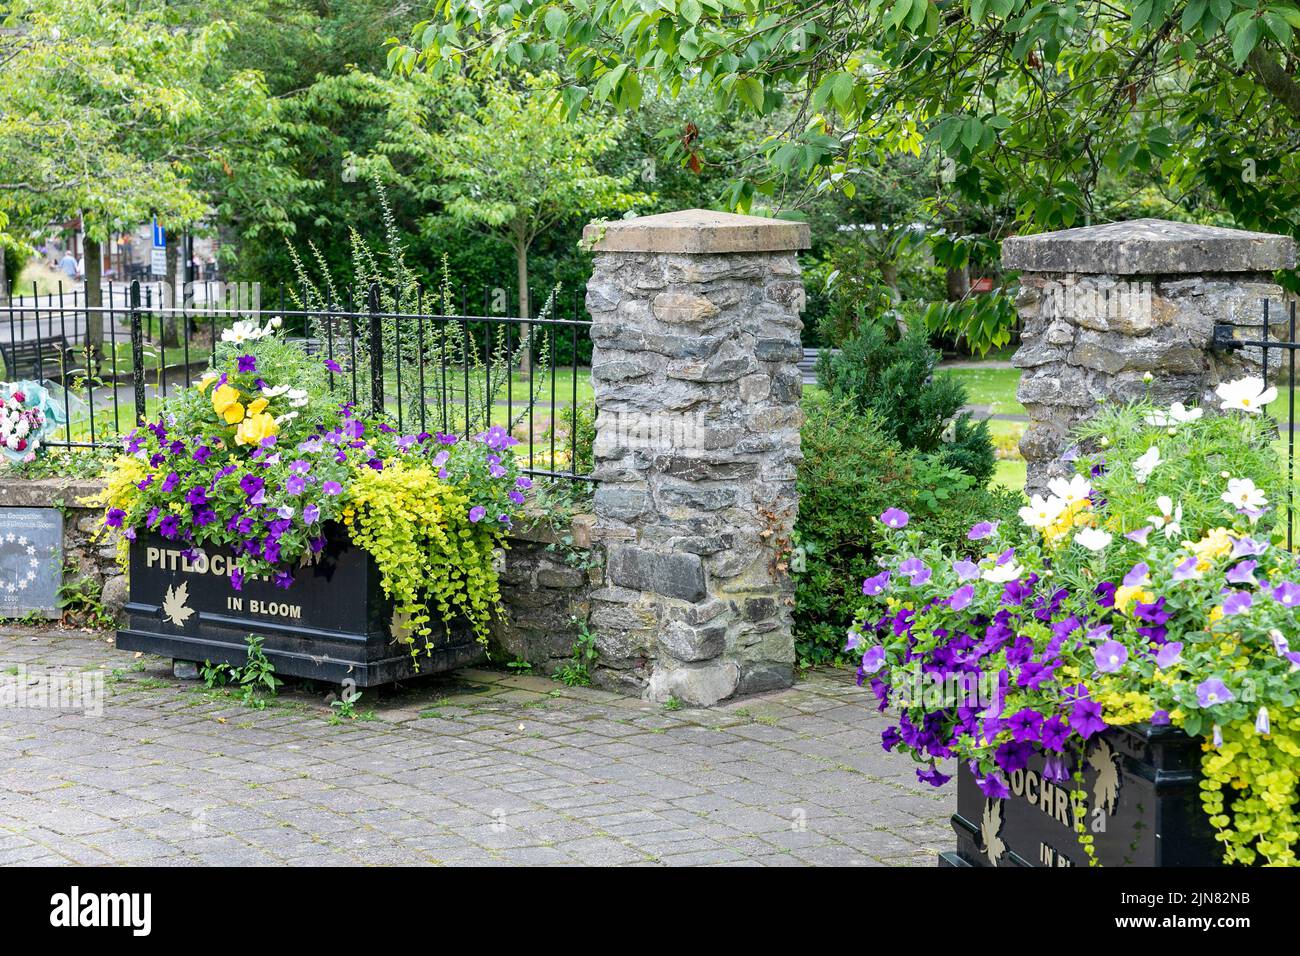 Pitlochry town centre in bloom, flowers blooming in summer 2022,Pitlochry,Scotland,UK Stock Photo